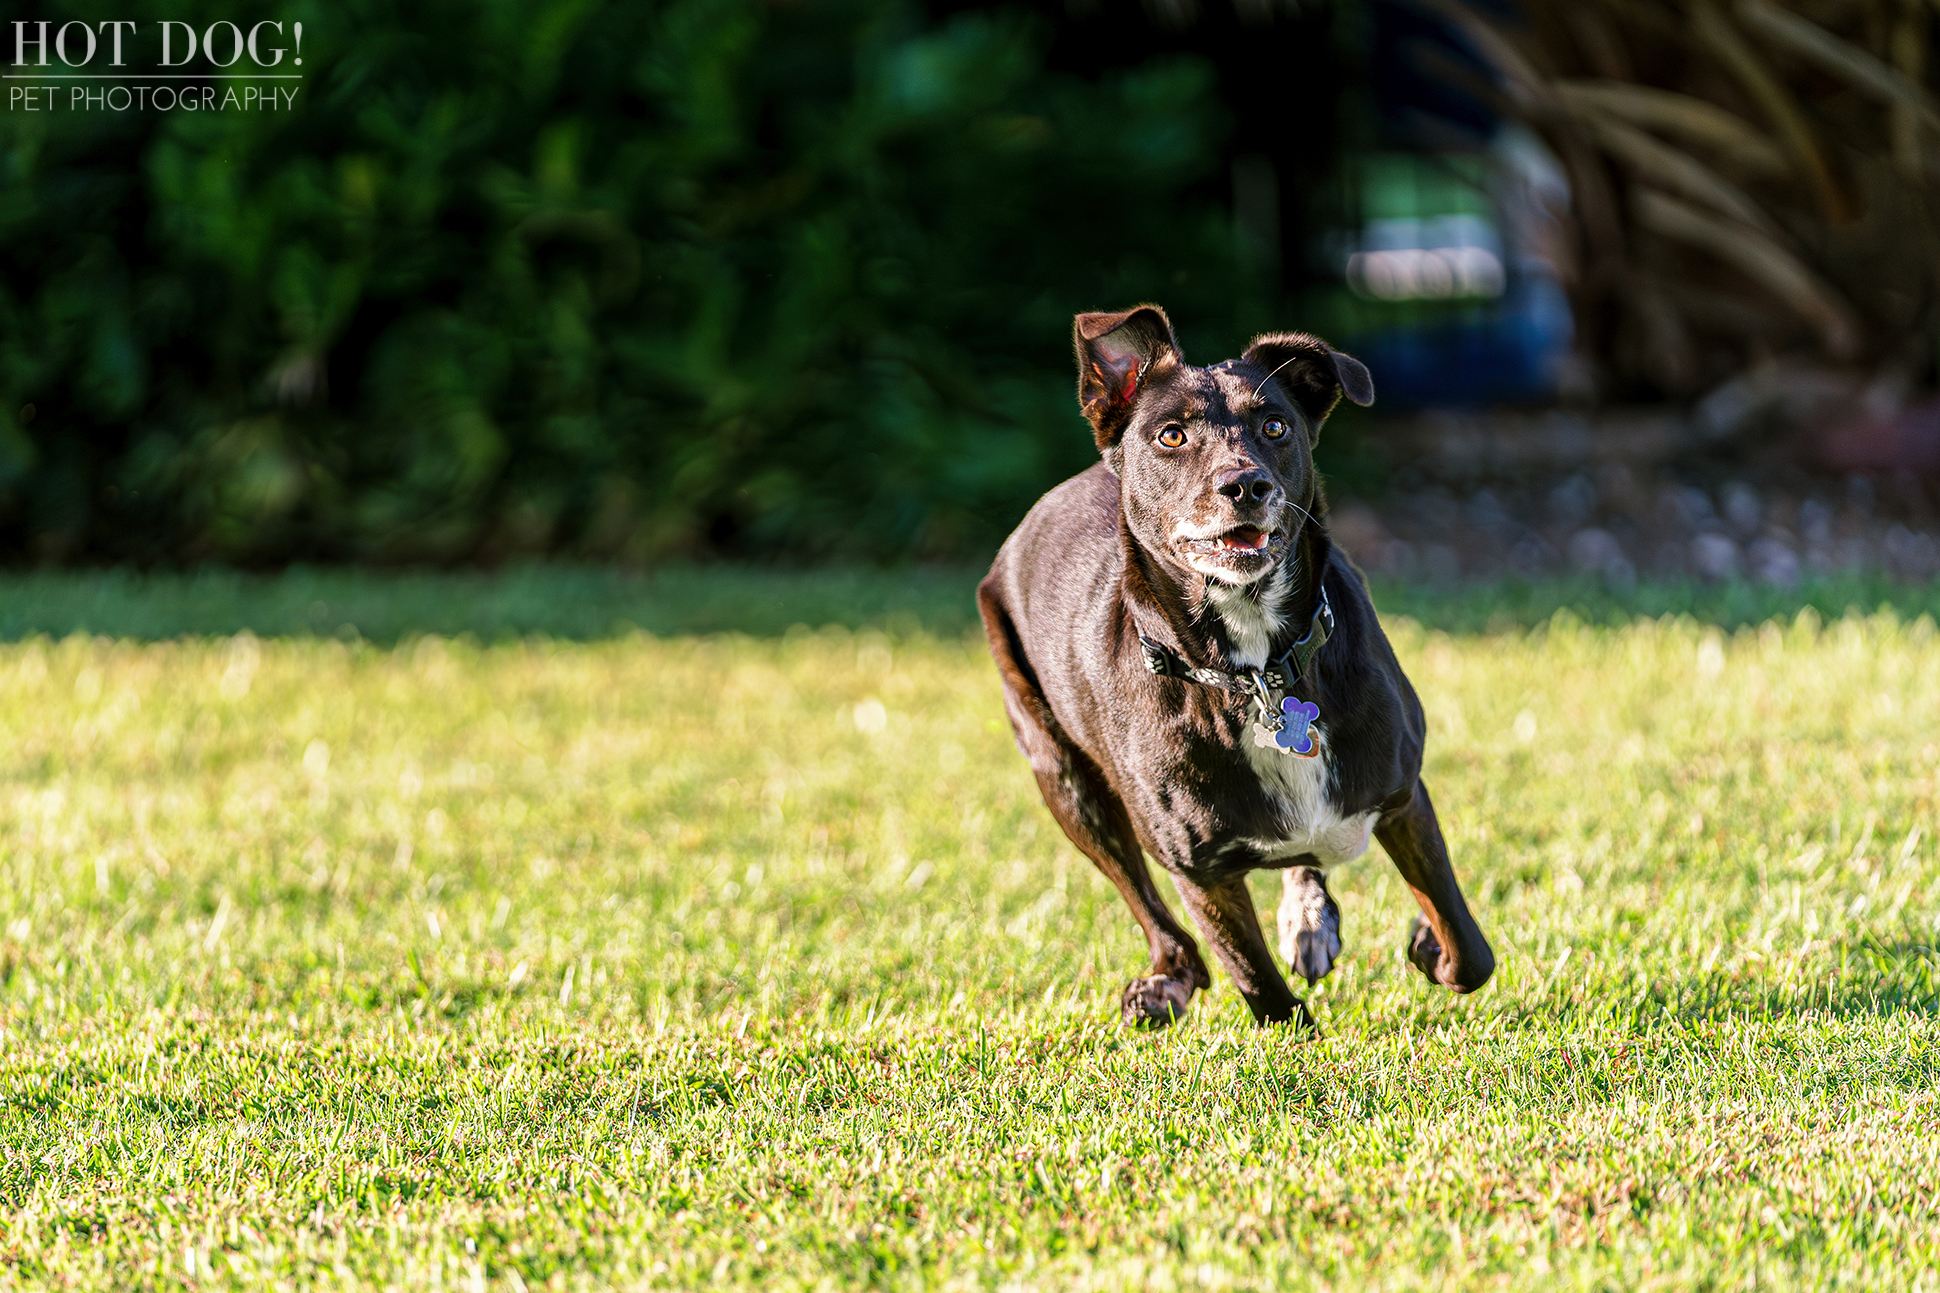 Sun-kissed zoomies! Mixed breed pup Roxie races through her backyard in College Park, Florida, her fur ablaze with joy. (Photo by Hot Dog! Pet Photography)